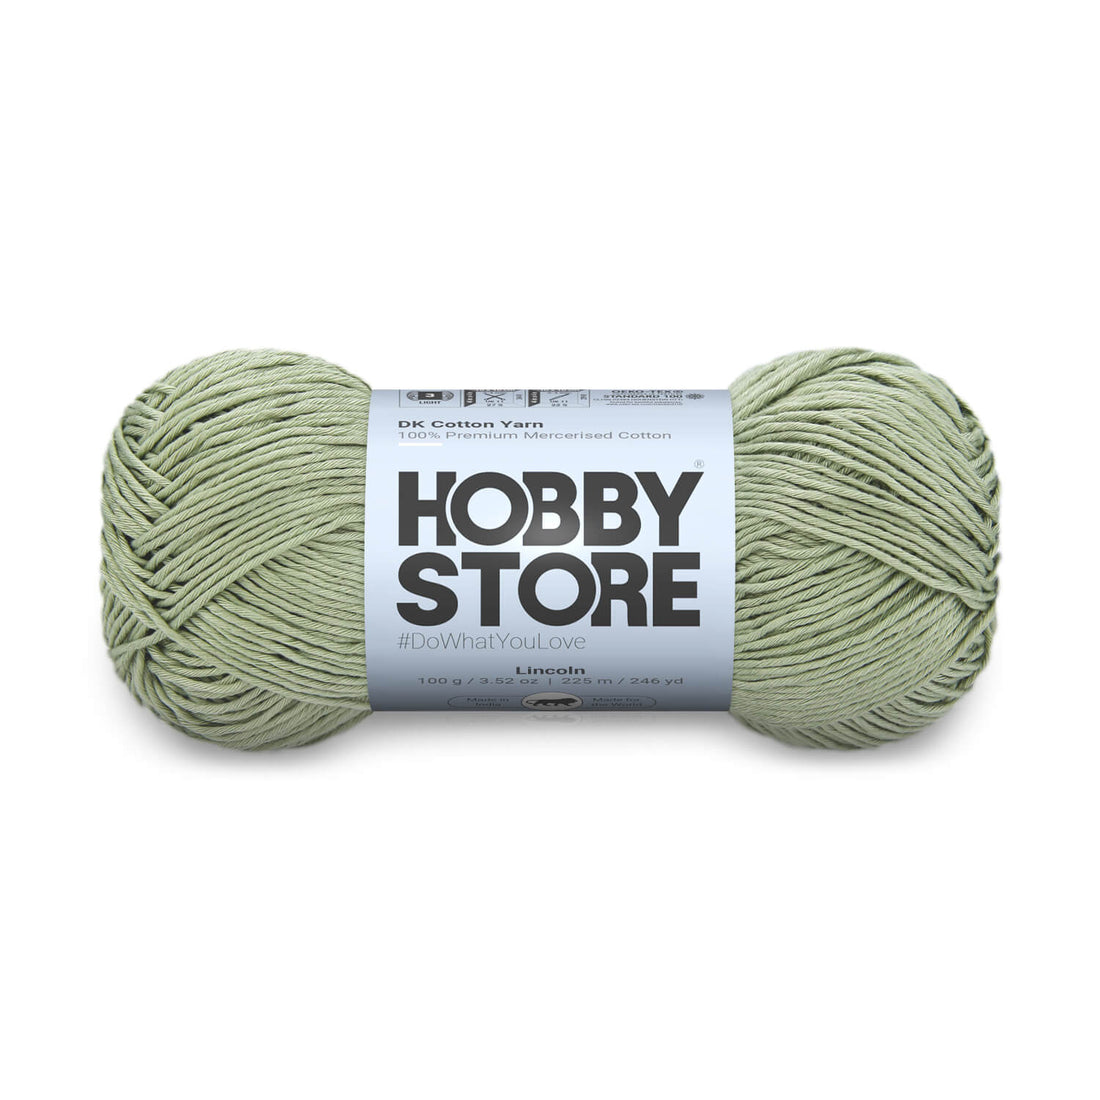 DK Mercerised Cotton Yarn by Hobby Store - Lincoln - 327